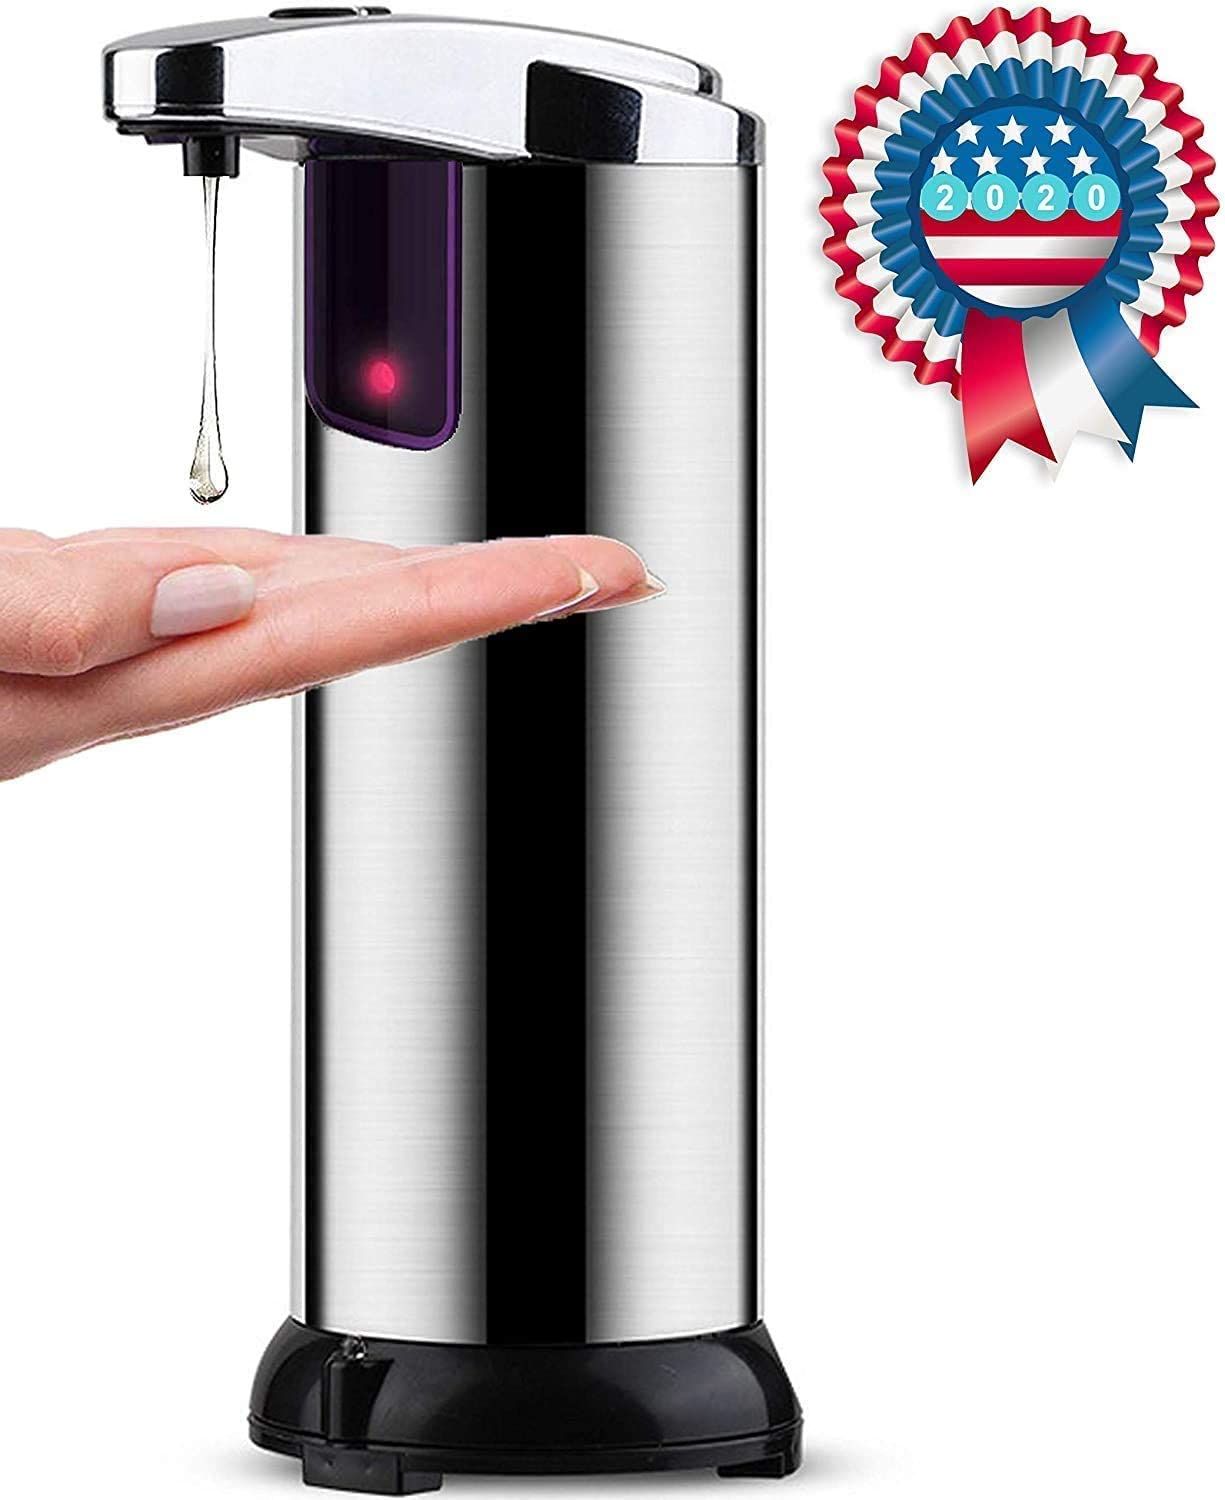 How and When Should You Wash Your Hands? A CDC Guideline: Here's Amazon Top Soap Dispensers